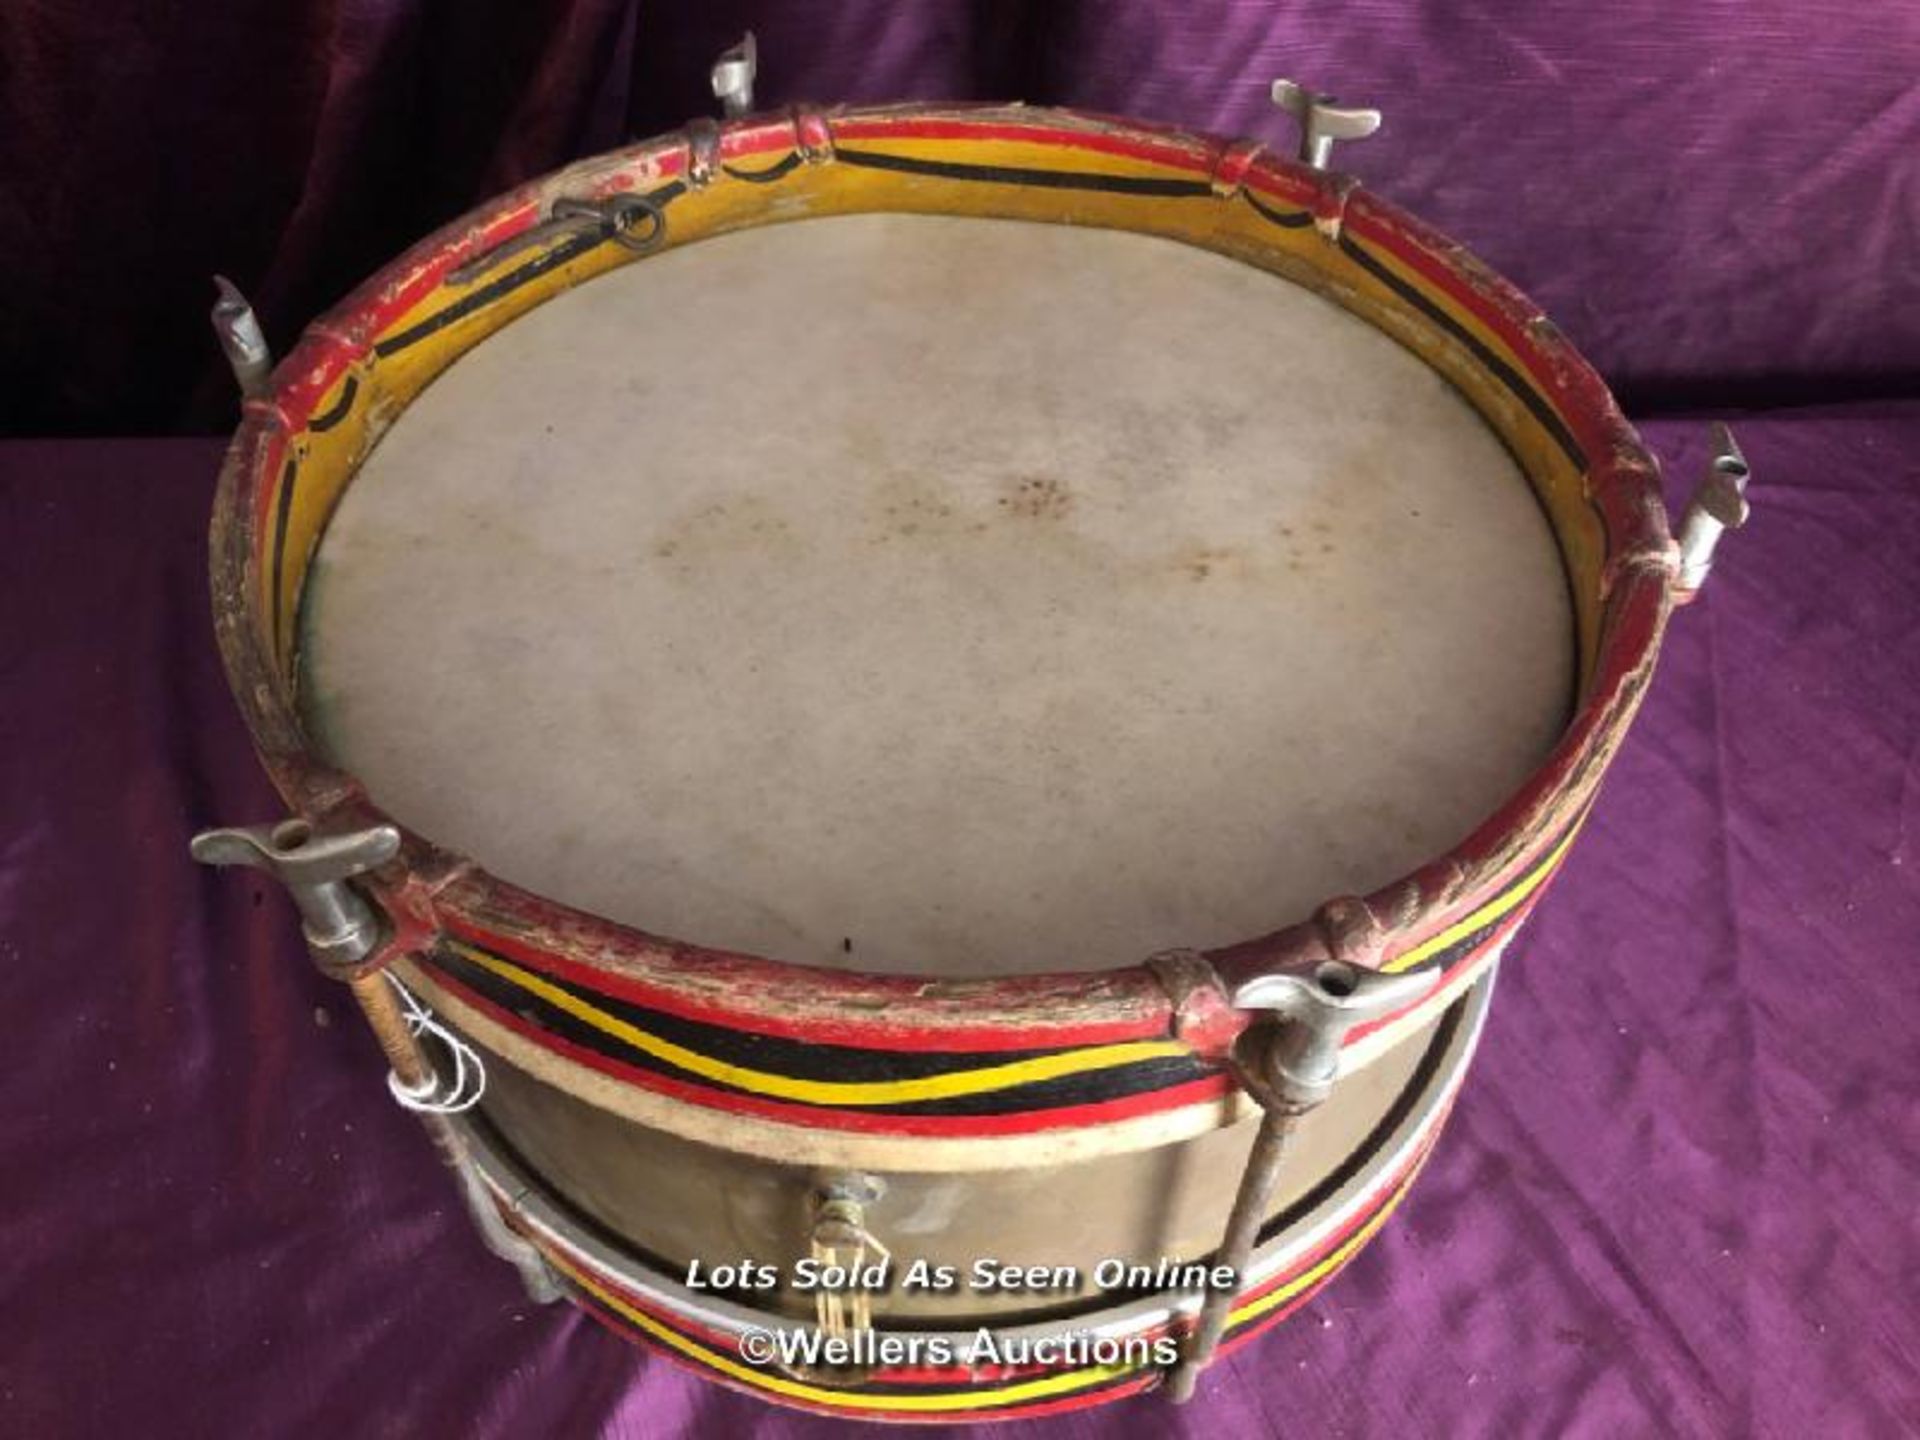 19TH CENTURY FRENCH MILITARY BAND SNARE DRUM WITH ASSOCIATED STABLE STRAP - Image 2 of 2